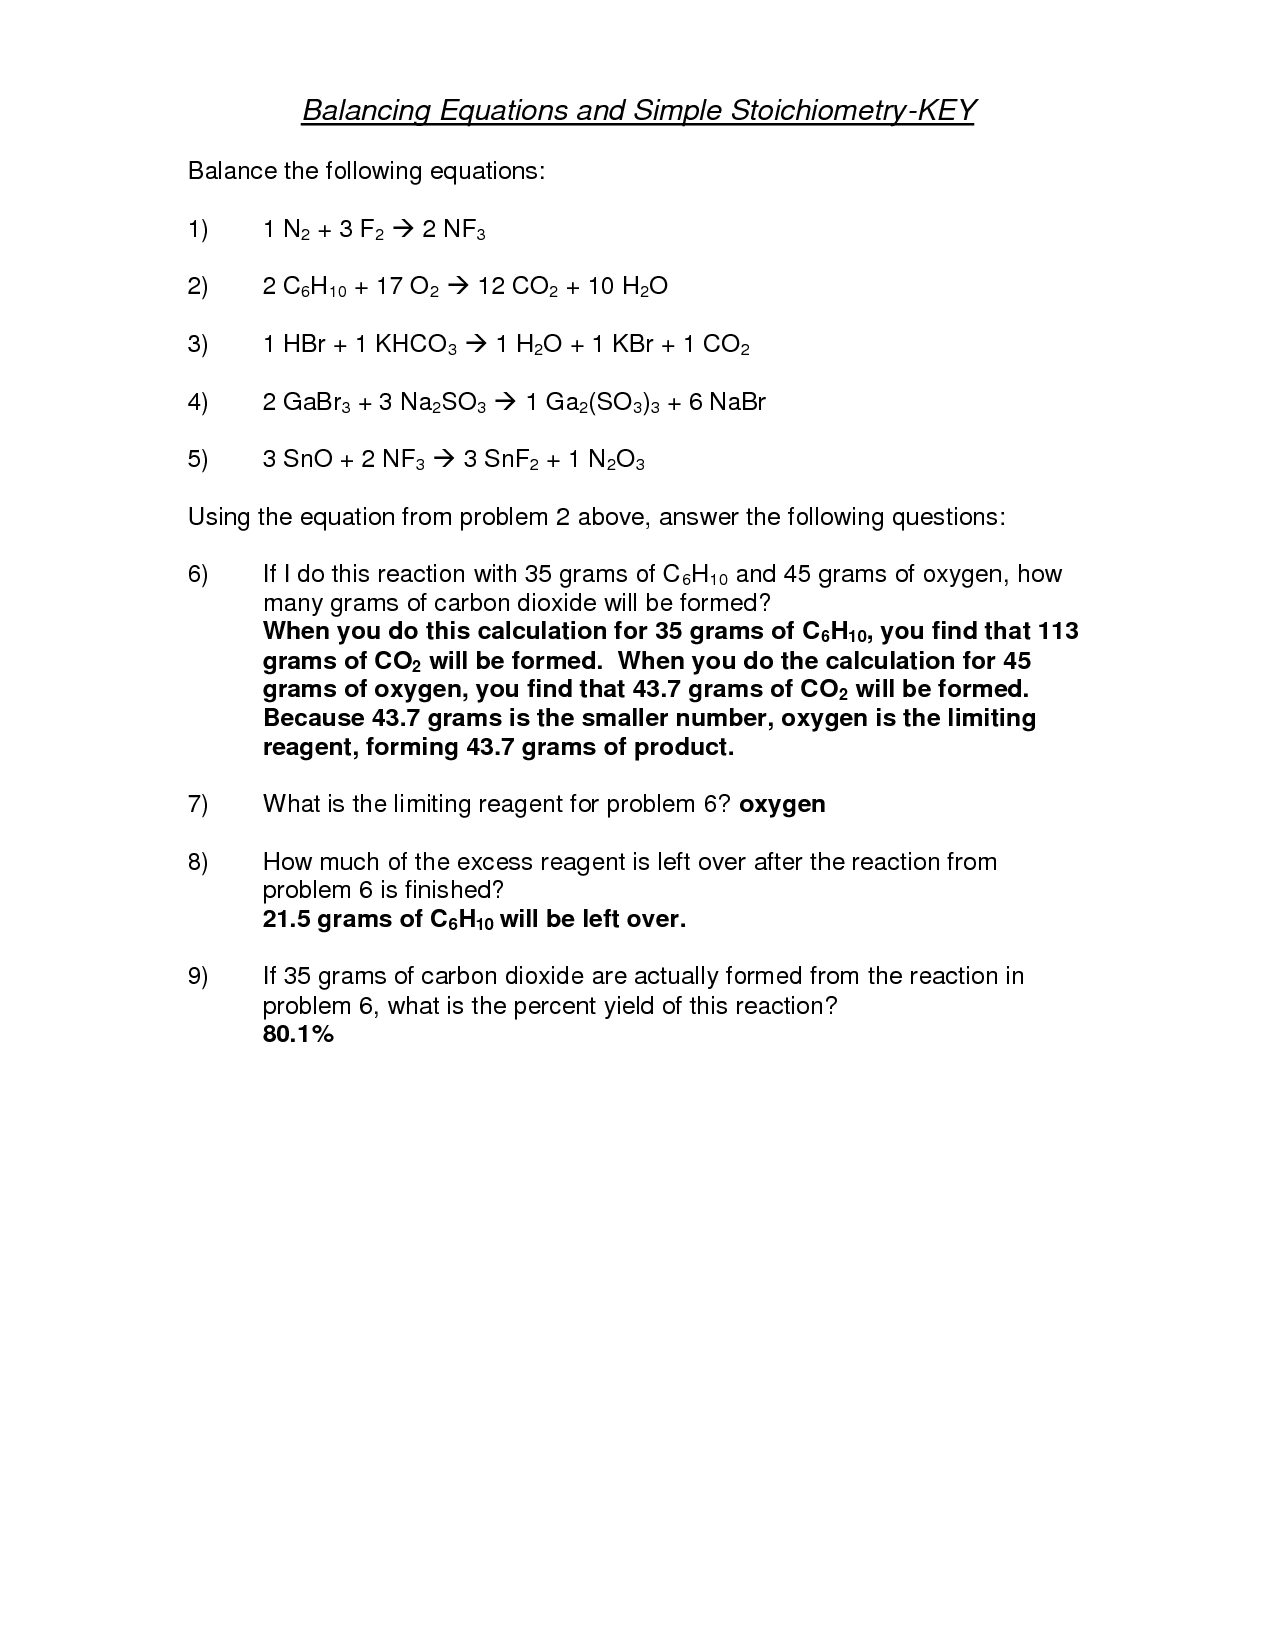 13-best-images-of-practice-balancing-equations-worksheet-key-balancing-equations-practice